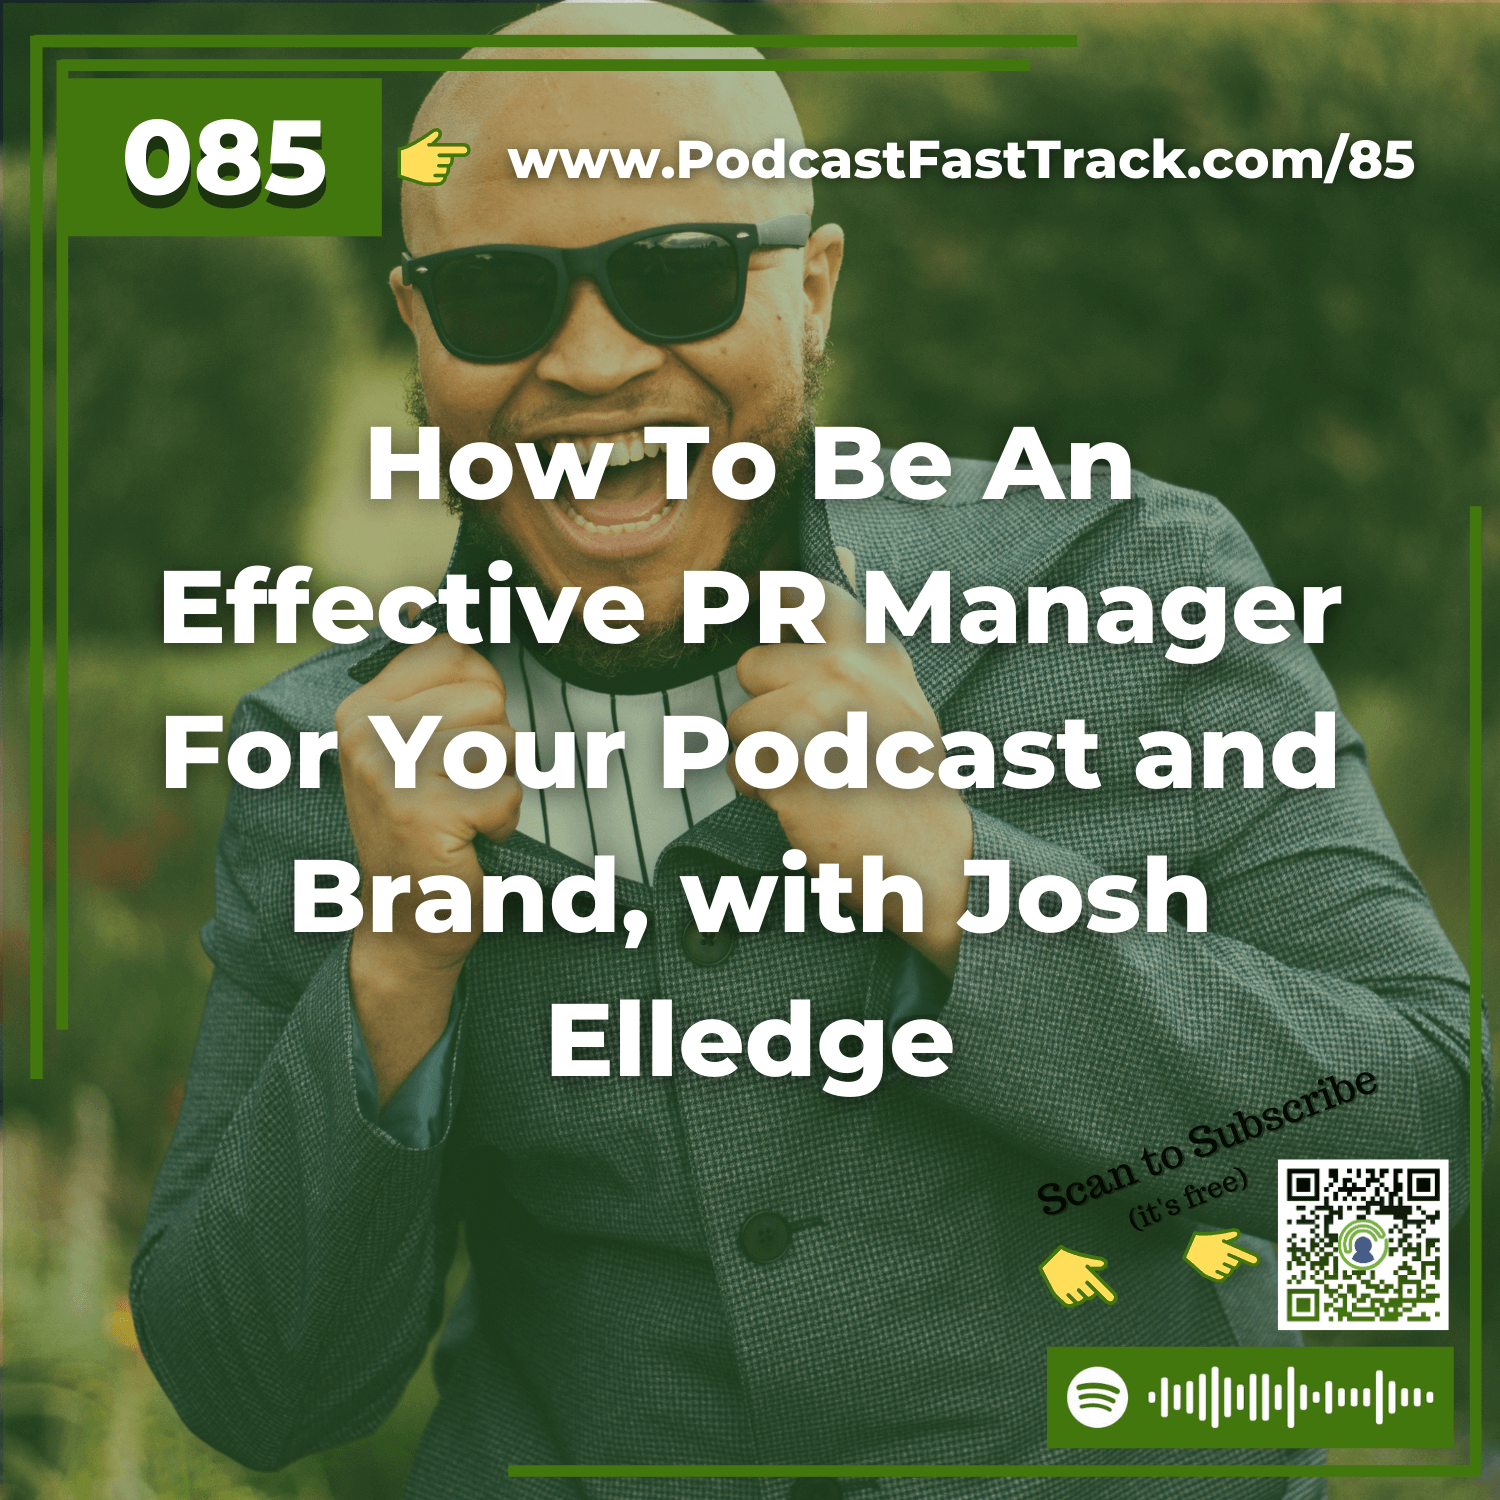 85: How To Be An Effective PR Manager For Your Podcast and Brand, with Josh Elledge